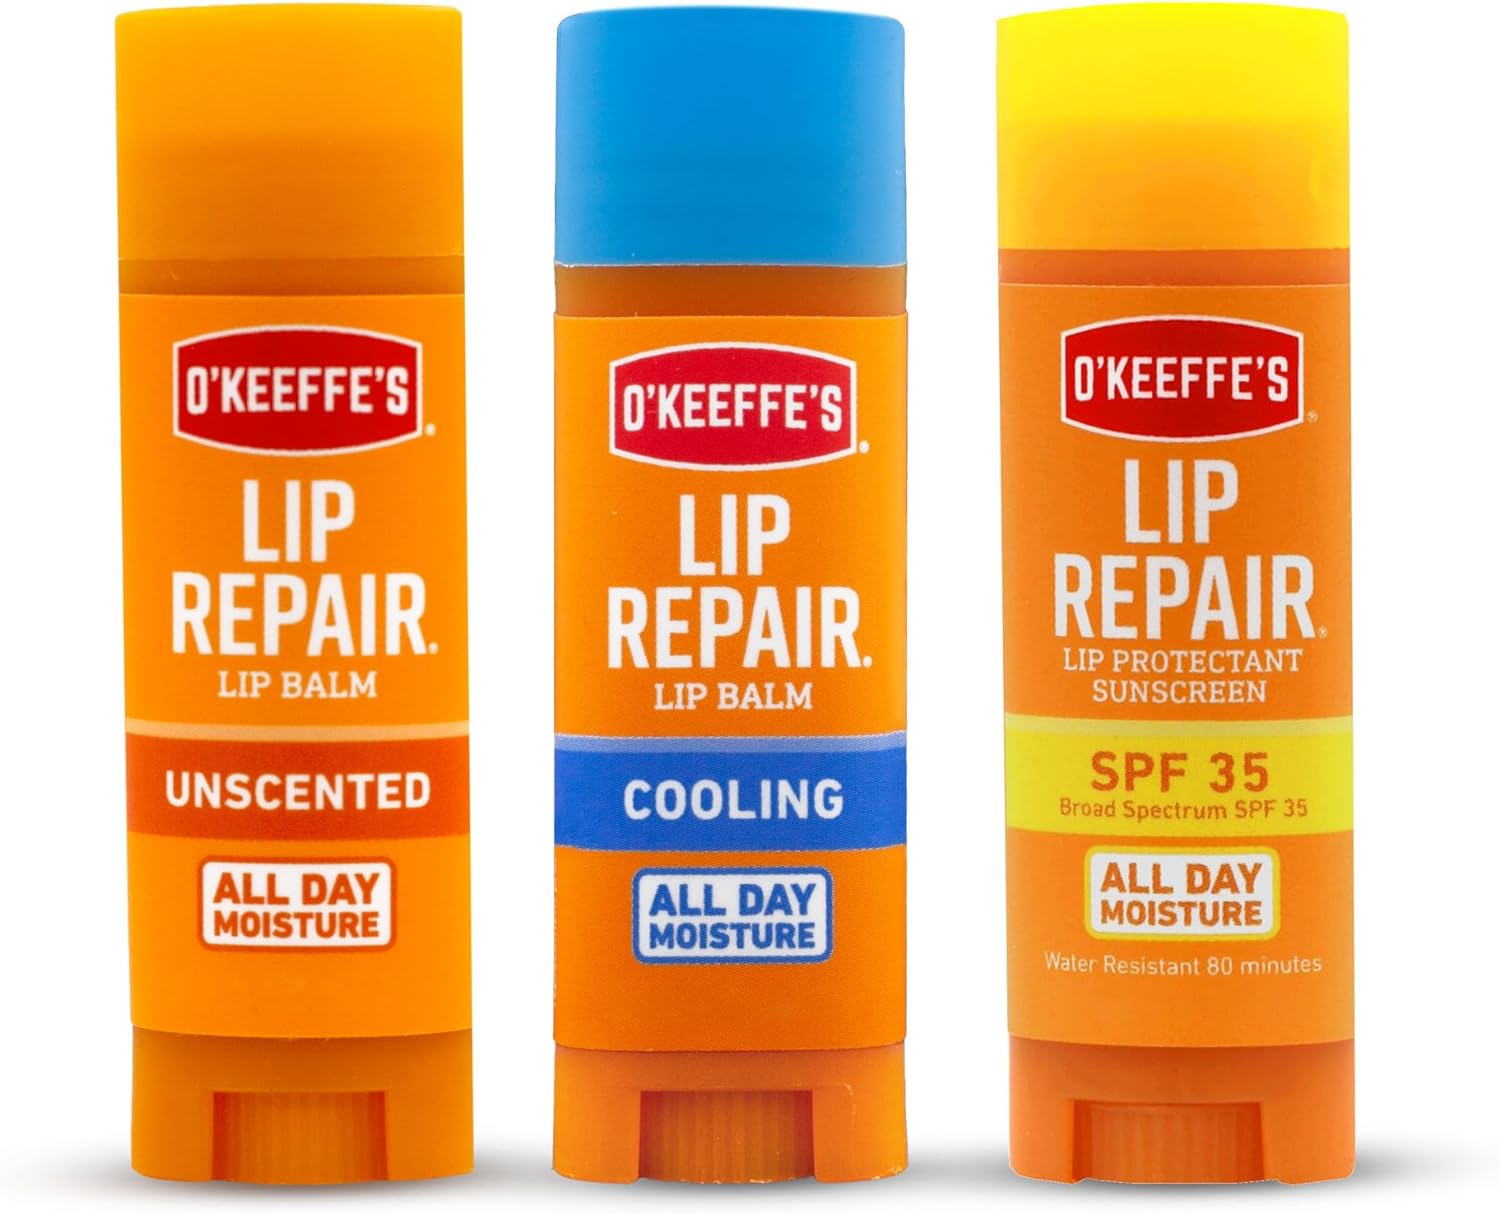 O'Keeffe's Lip Repair Lip Balm for Dry, Cracked Lips, Stick, (Pack of 3: 1 Cooling + 1 Unscented + 1 SPF)